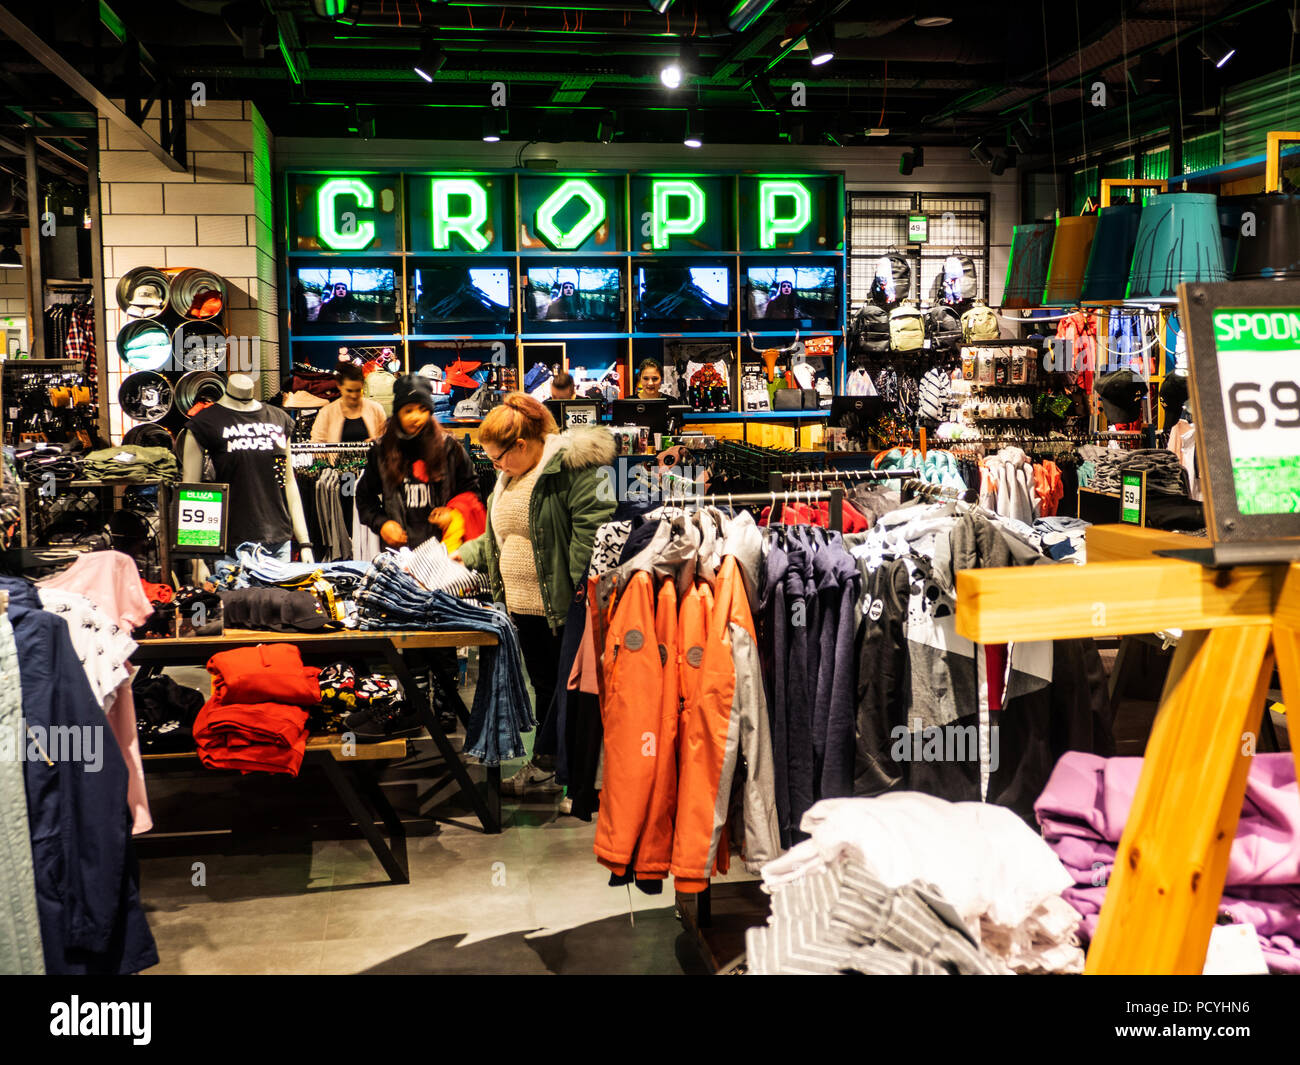 POLAND, KRAKOW - March 19, 2018: Cropp store in Galeria Krakowska. Cropp is  one of brands of LPP S. A. (Lubianiec Piechocki and Partnerzy) is a large  Polish retailing company based in